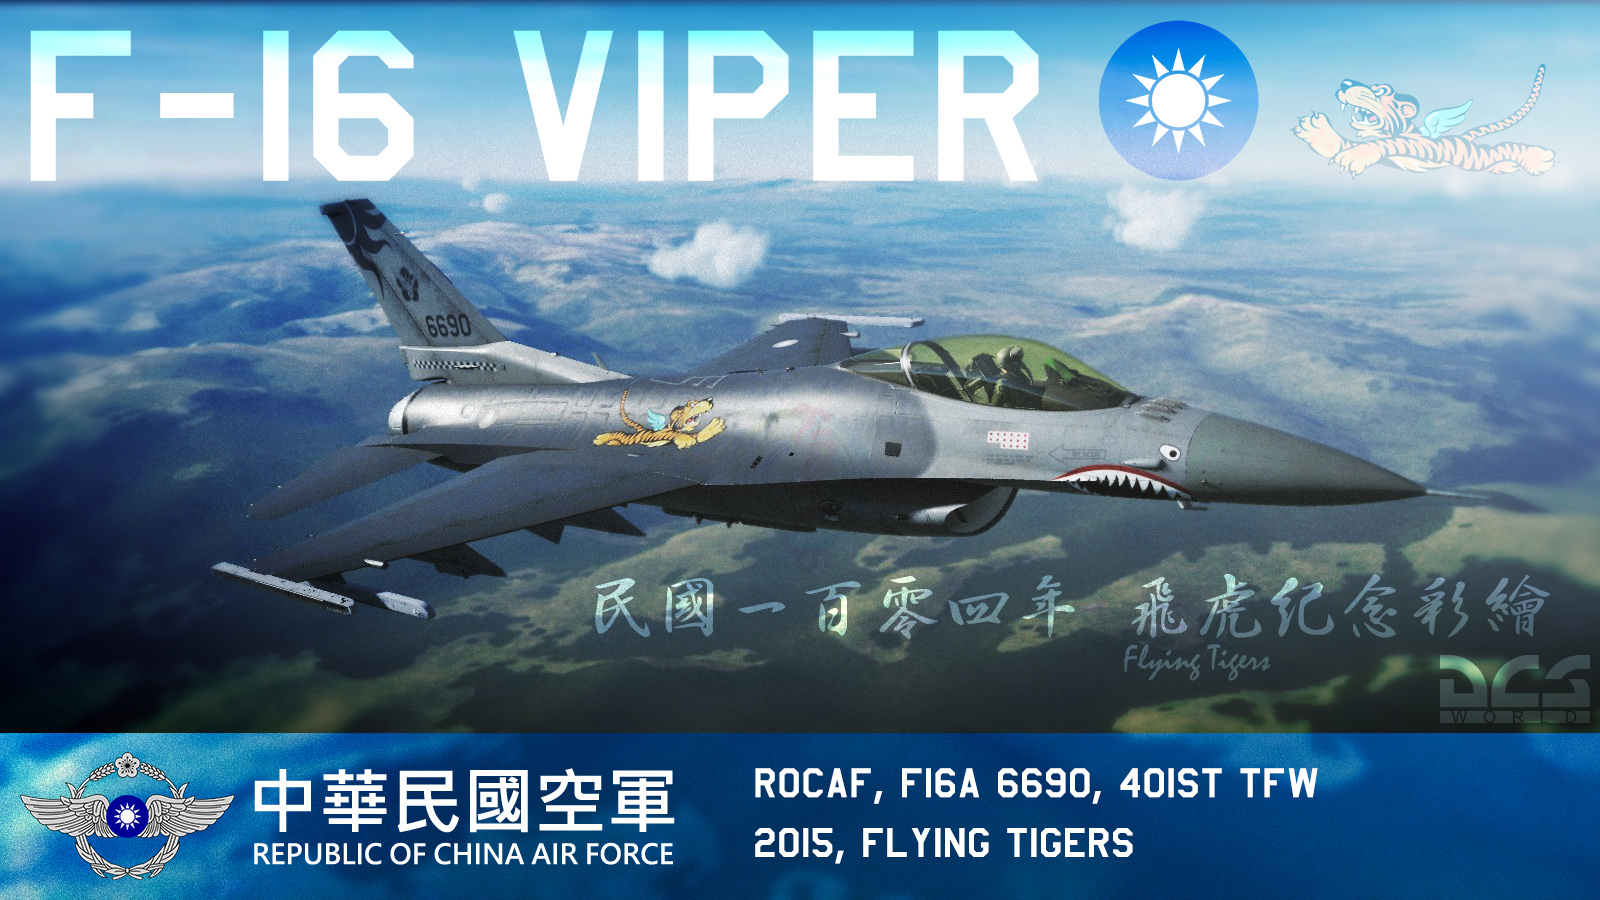 [Ver.3.0]ROCAF, F16A 6690, 401st TFW, 2015, Flying Tigers